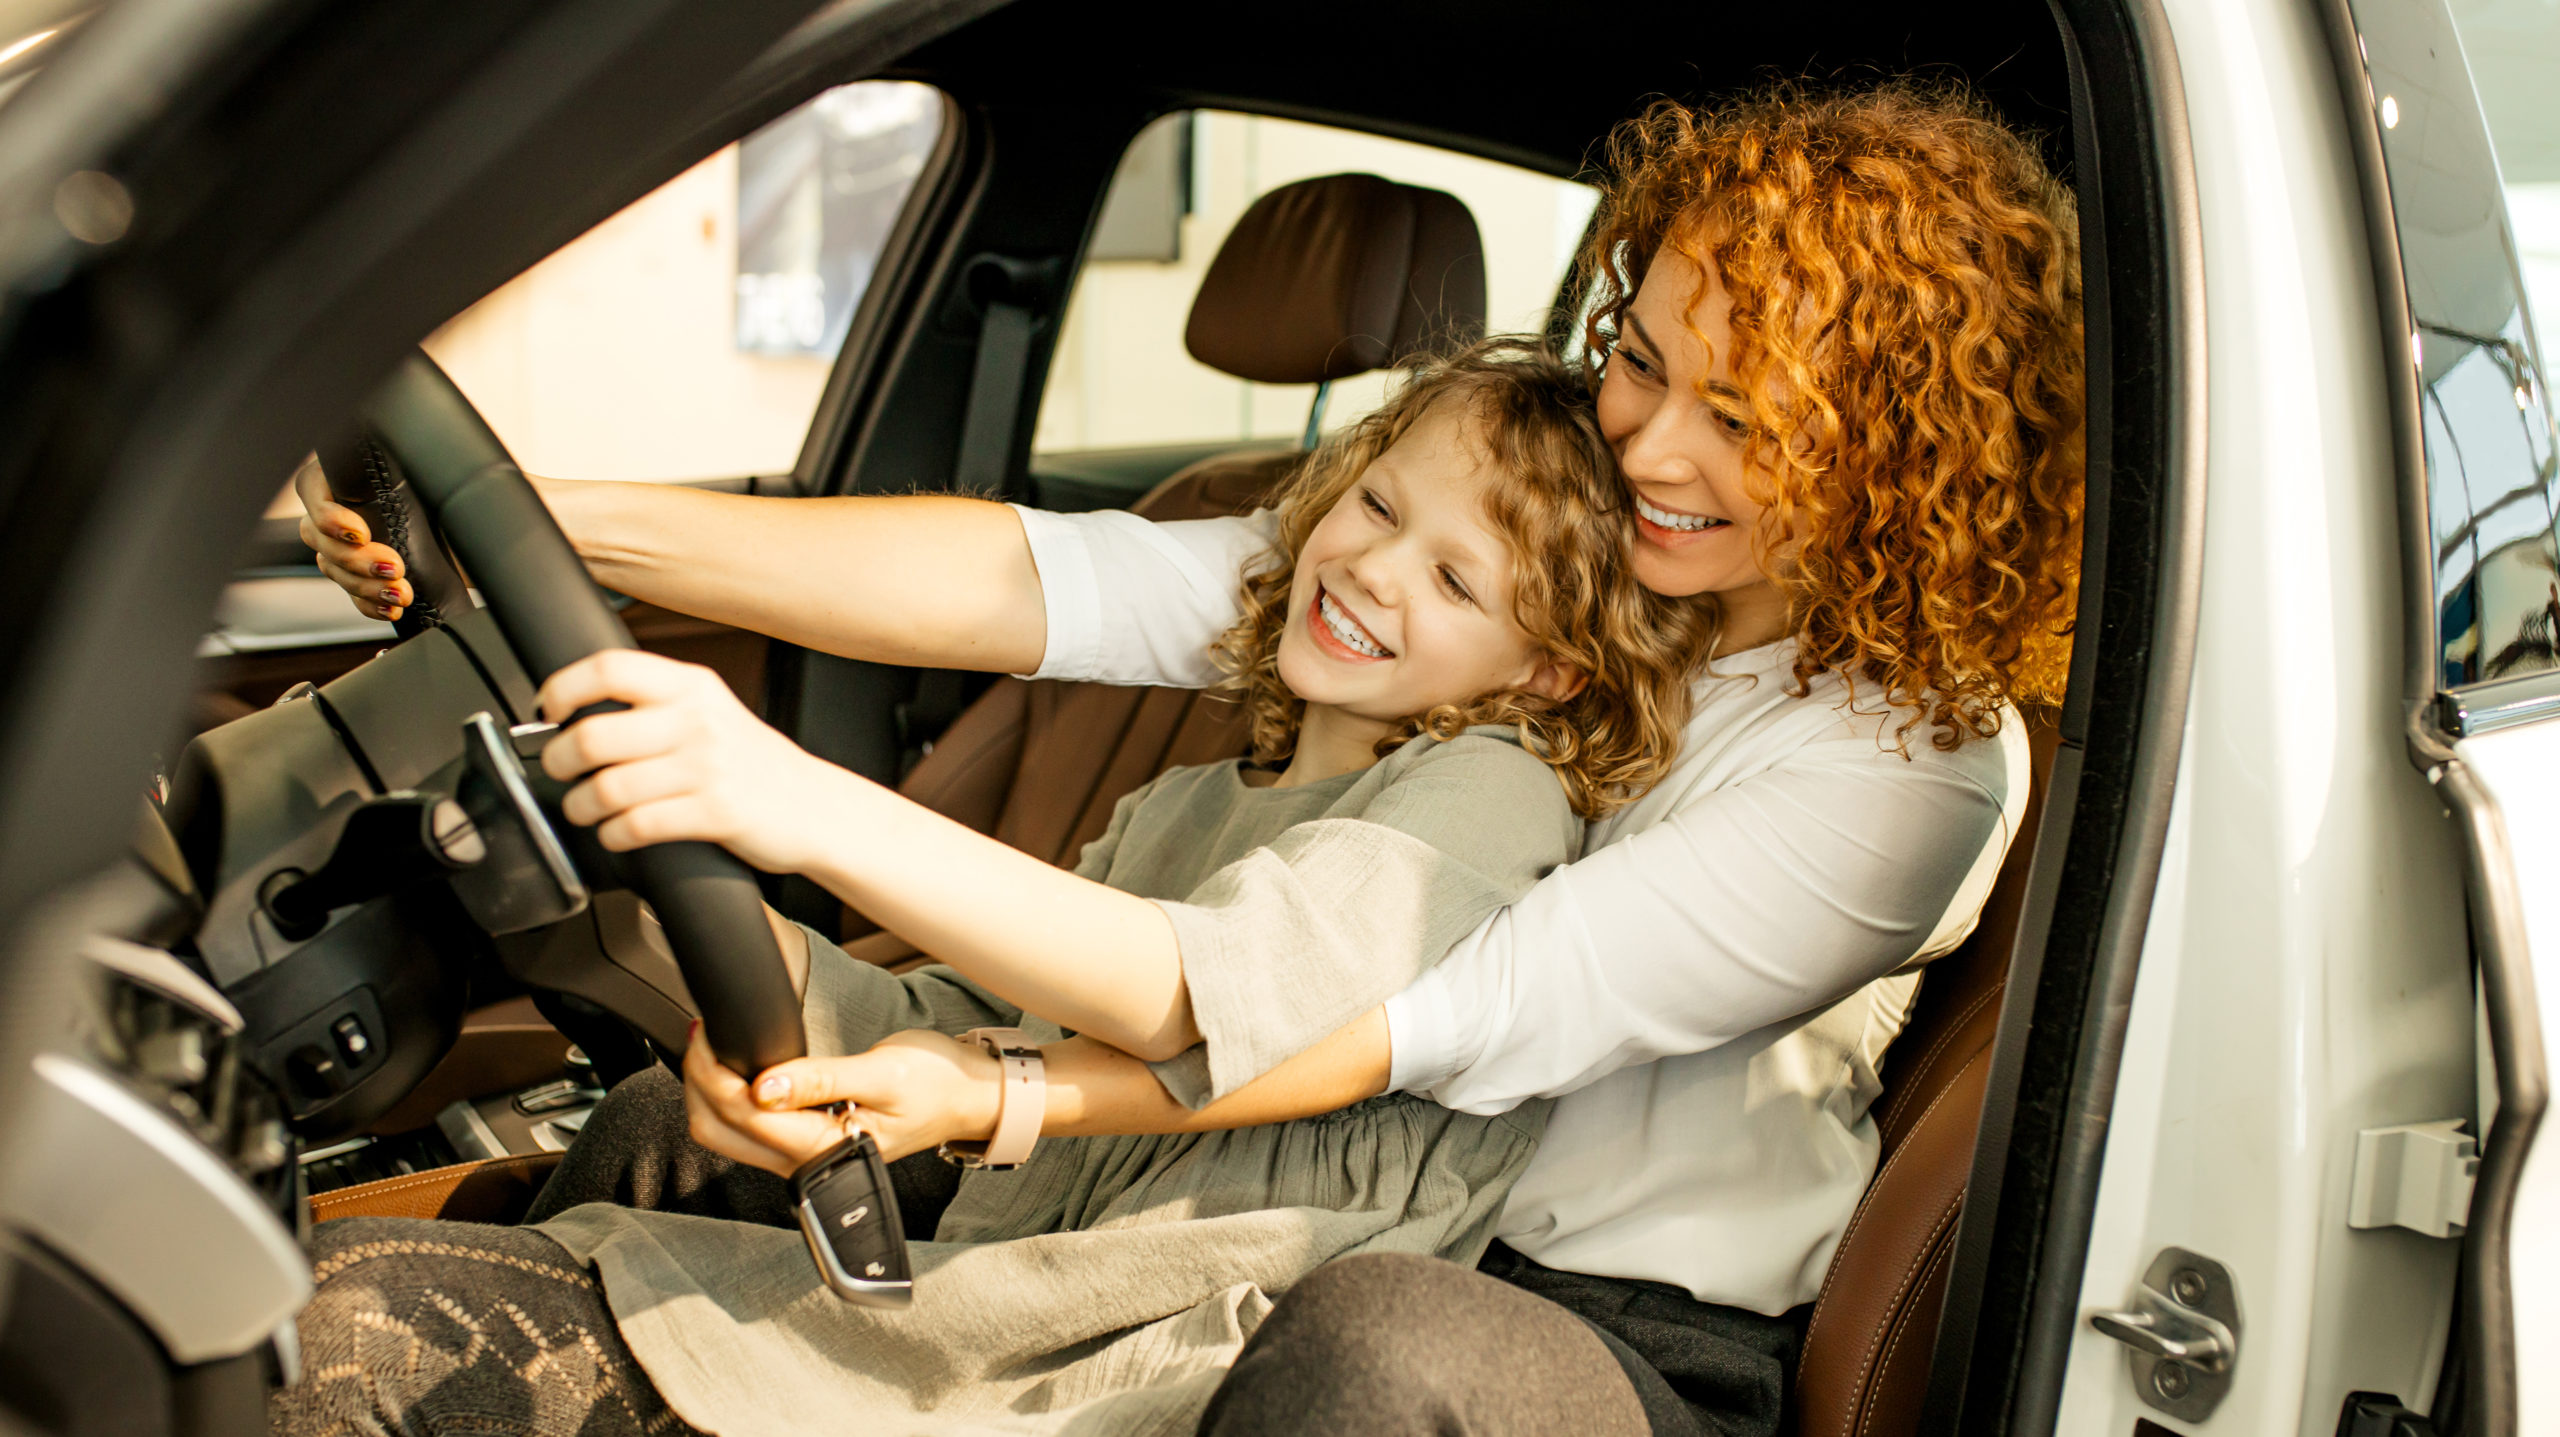 10 Best Automotive Gifts for Mom in 2022 [Buying Guide]